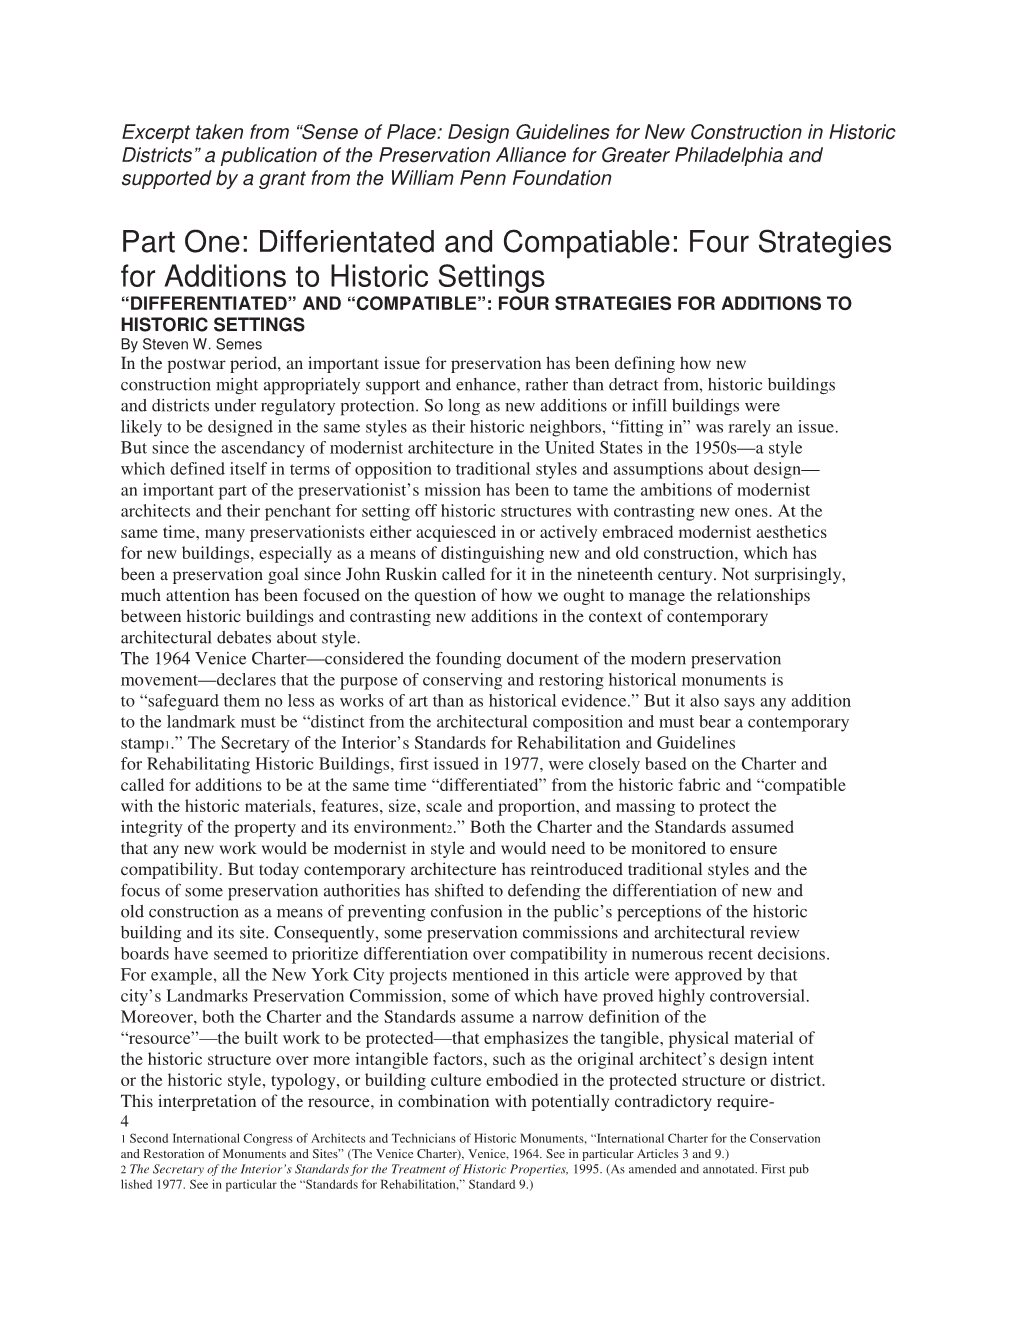 Four Strategies for Additions to Historic Settings “DIFFERENTIATED” and “COMPATIBLE”: FOUR STRATEGIES for ADDITIONS to HISTORIC SETTINGS by Steven W